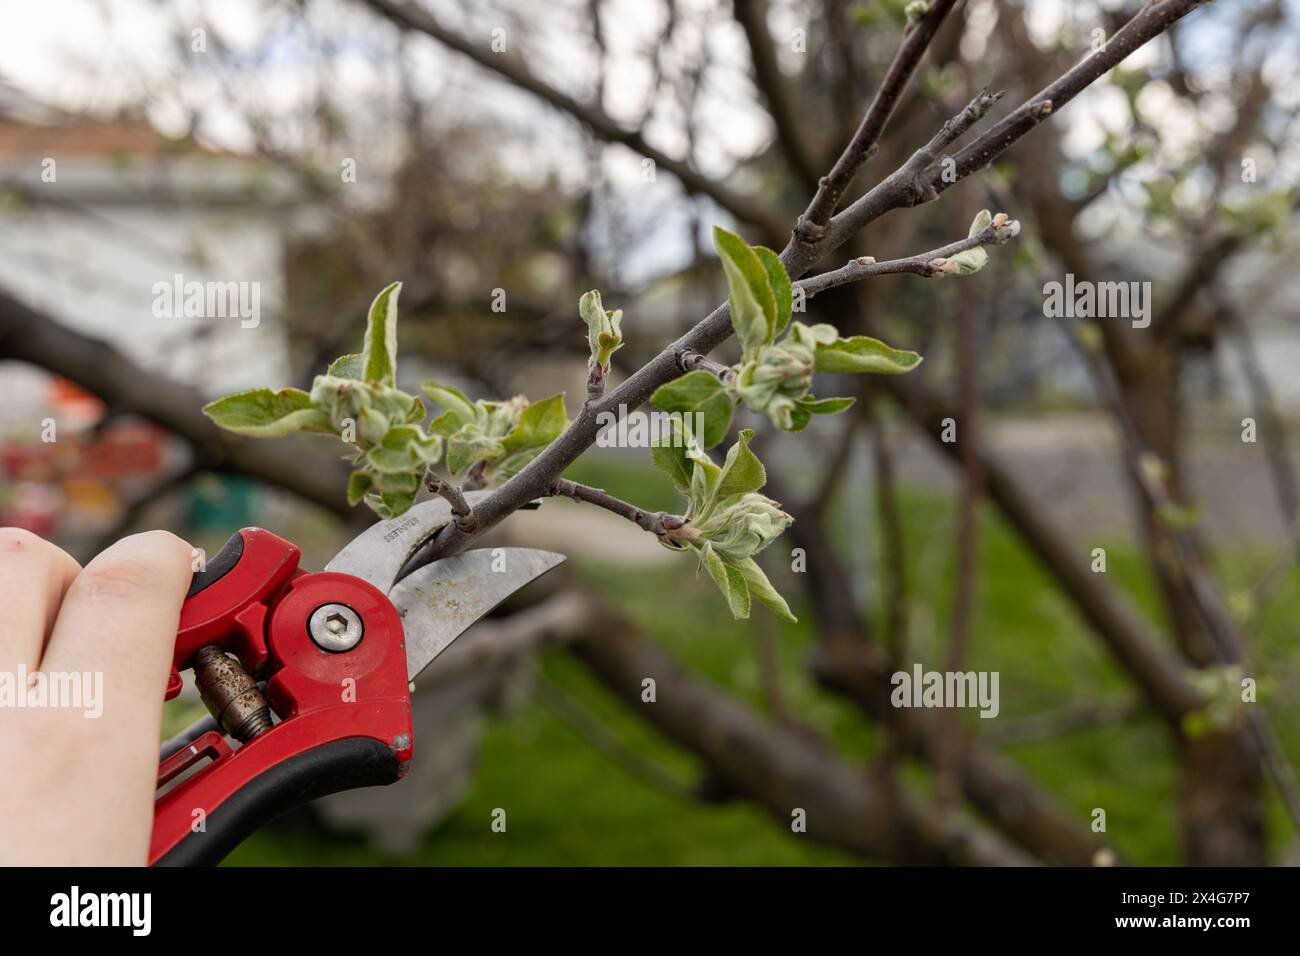 Pruning young apple tree in spring Stock Photo